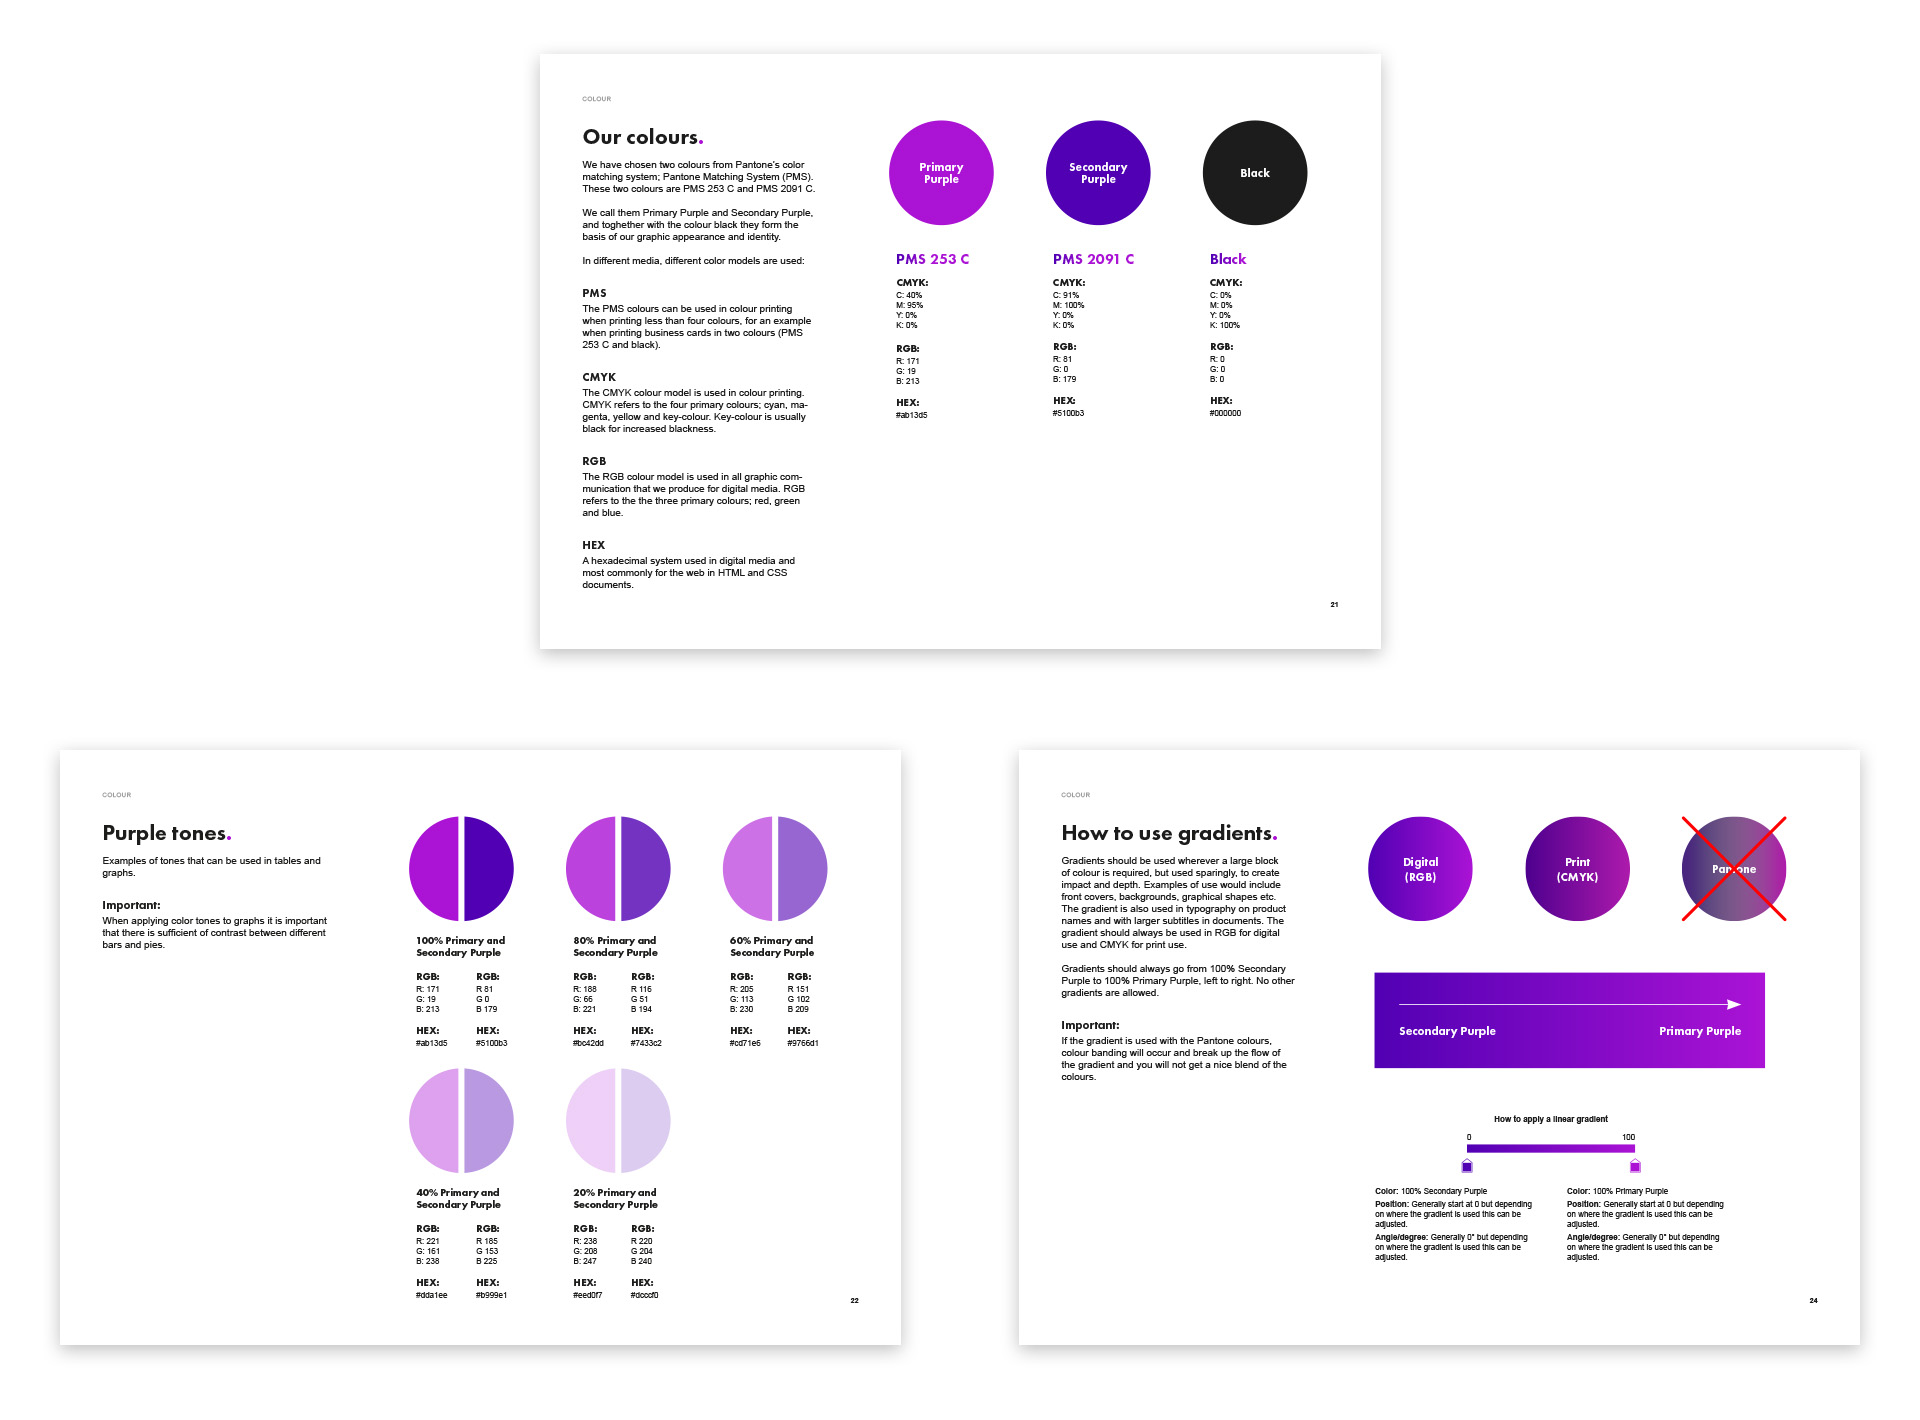 Sidor ur Formpipes Brand Guidelines 3.0